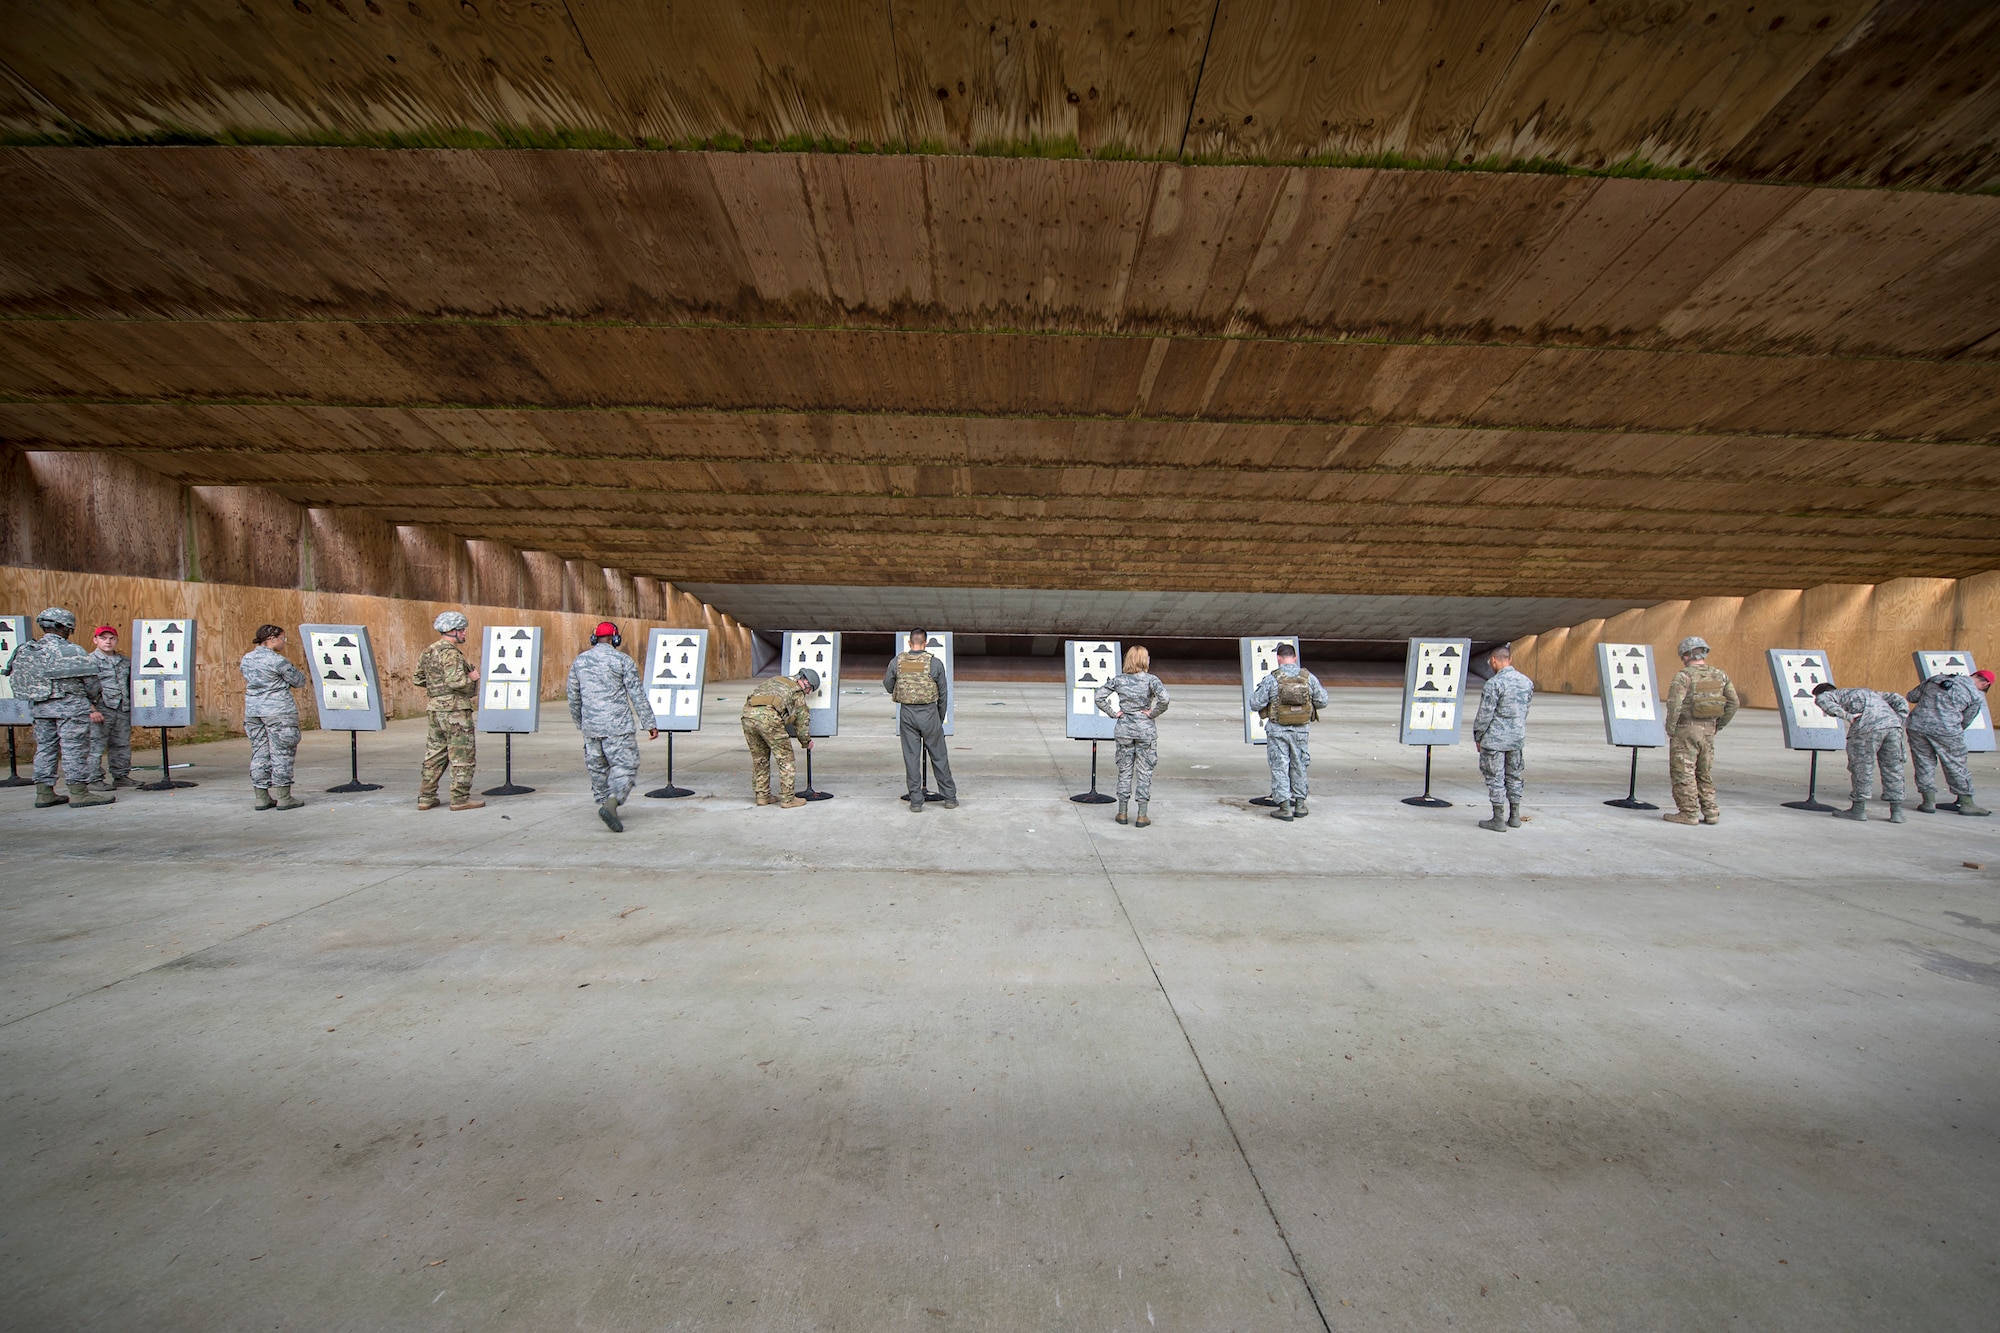 Airmen scrutinize their target sheets during a Combat Arms Training and Maintenance (CATM) class, April 4, 2018, at Moody Air Force Base, Ga.  Airmen must demonstrate quality safety standards while handling and shooting their weapons proficiently in order to be eligible to deploy. Throughout the class the instructors emphasized: weapon handling techniques, proper sight usage and internal weapon cleaning procedures.  (U.S. Air Force photo by Airman Eugene Oliver)